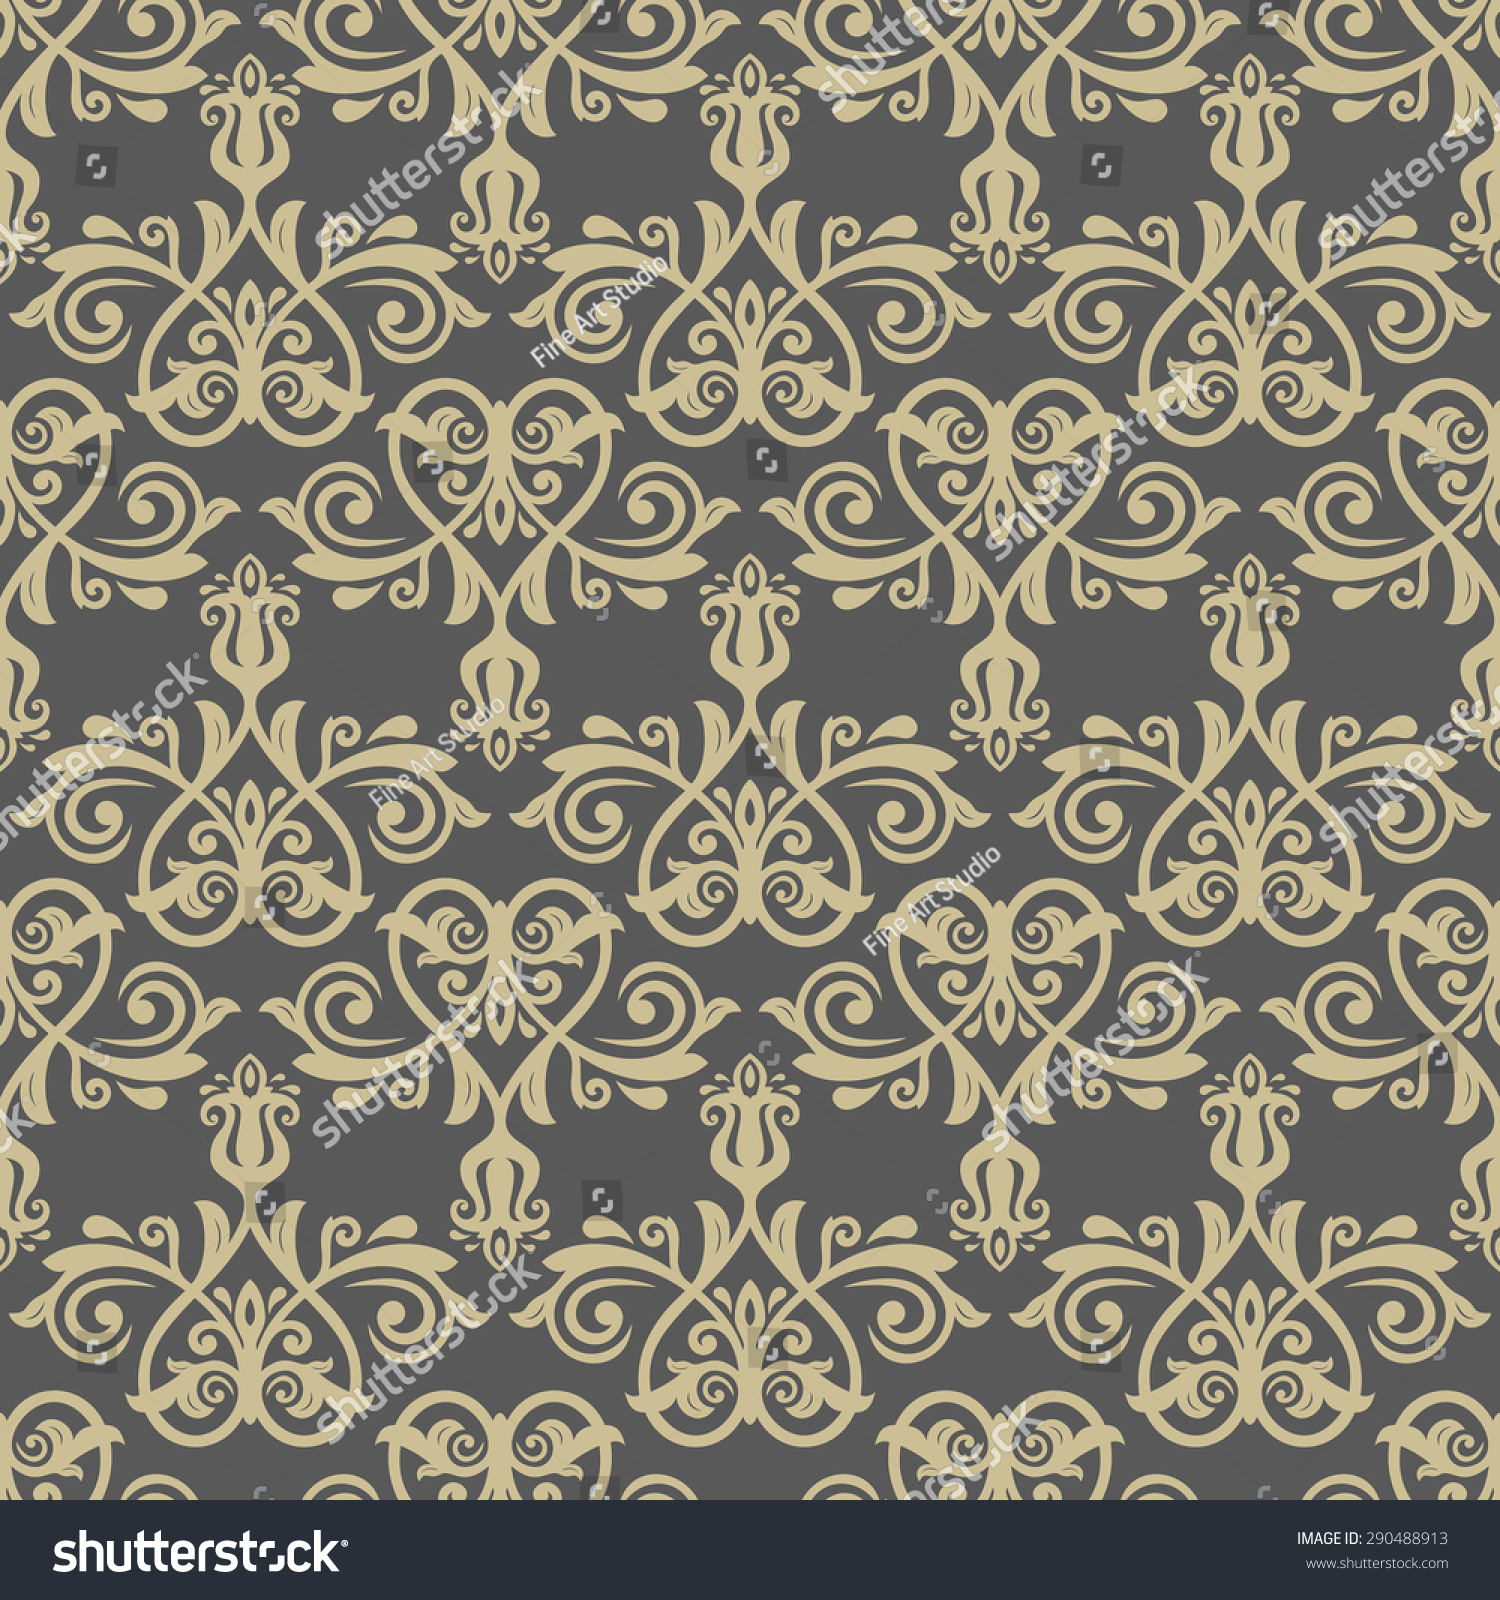 Damask Seamless Texture Fine Traditional Background Stock Illustration ...